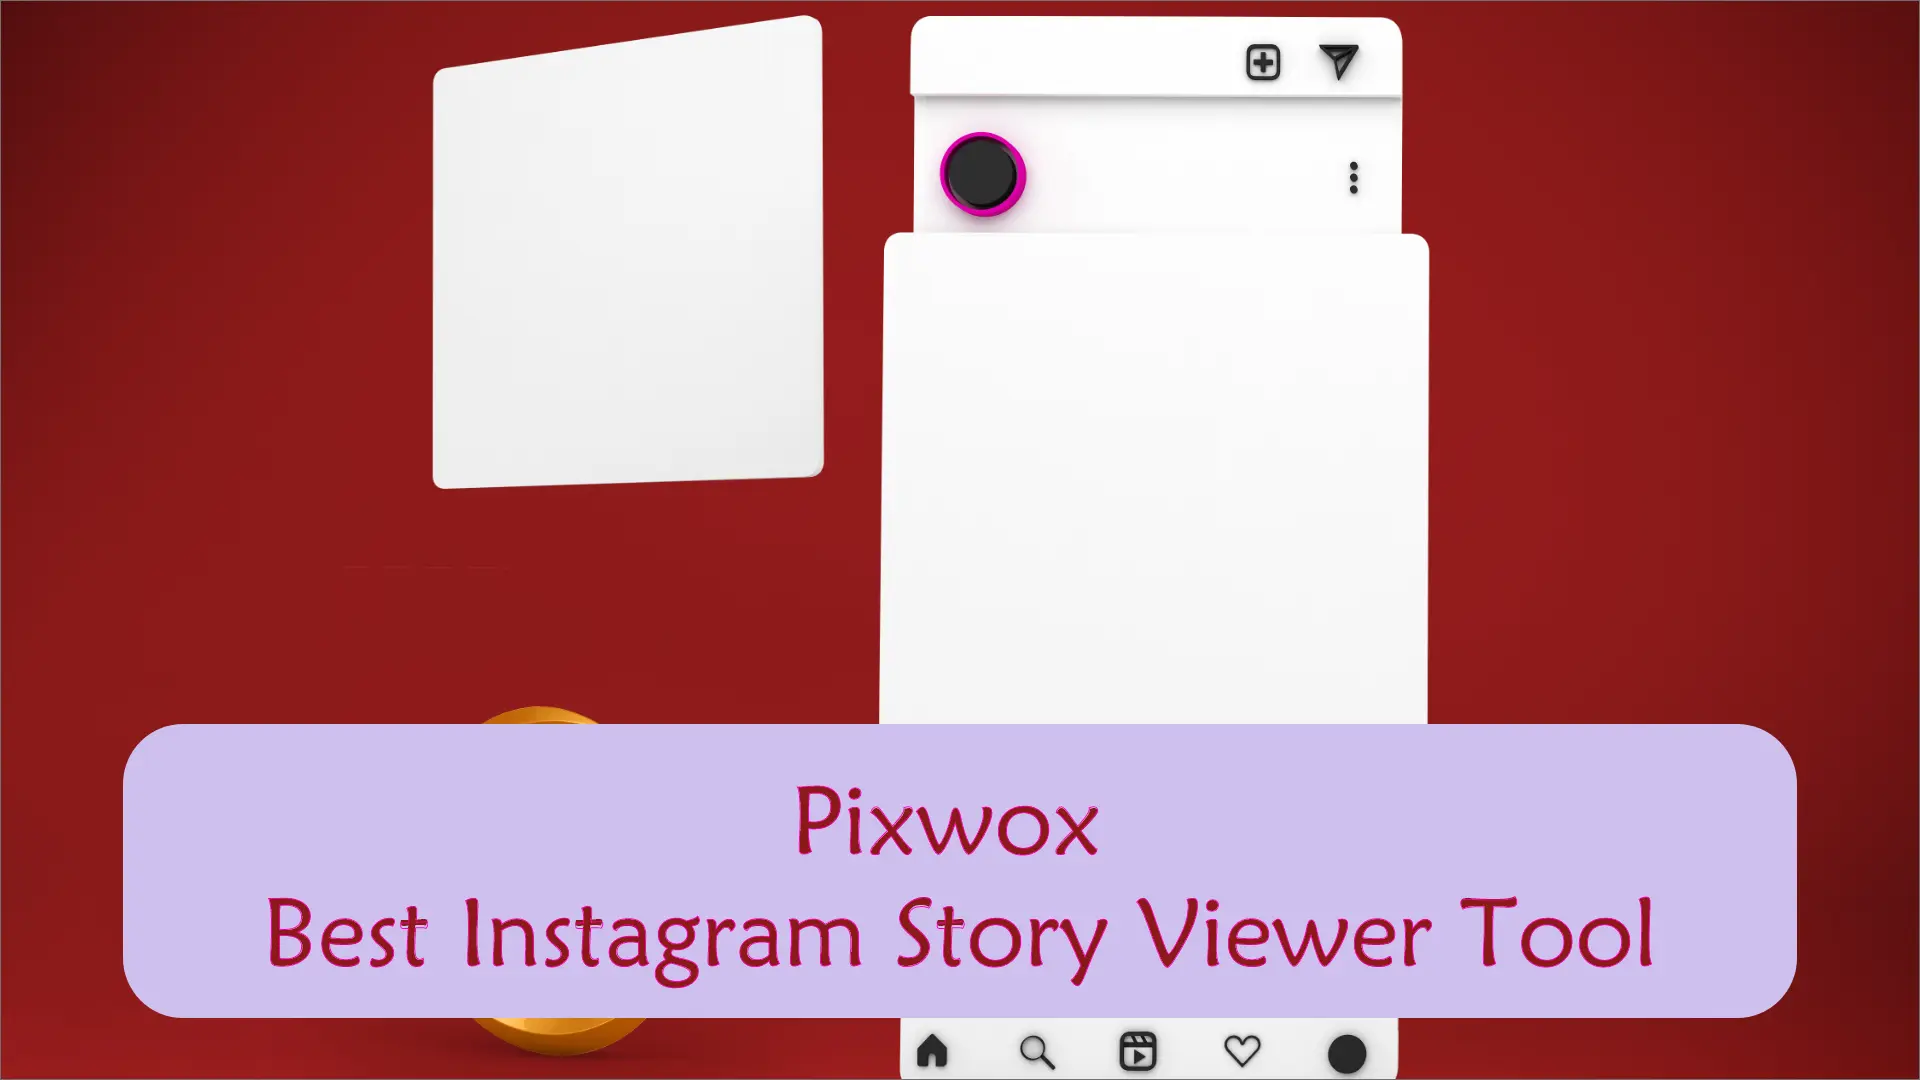 Pixwox: A Privacy-Focused Instagram Viewer